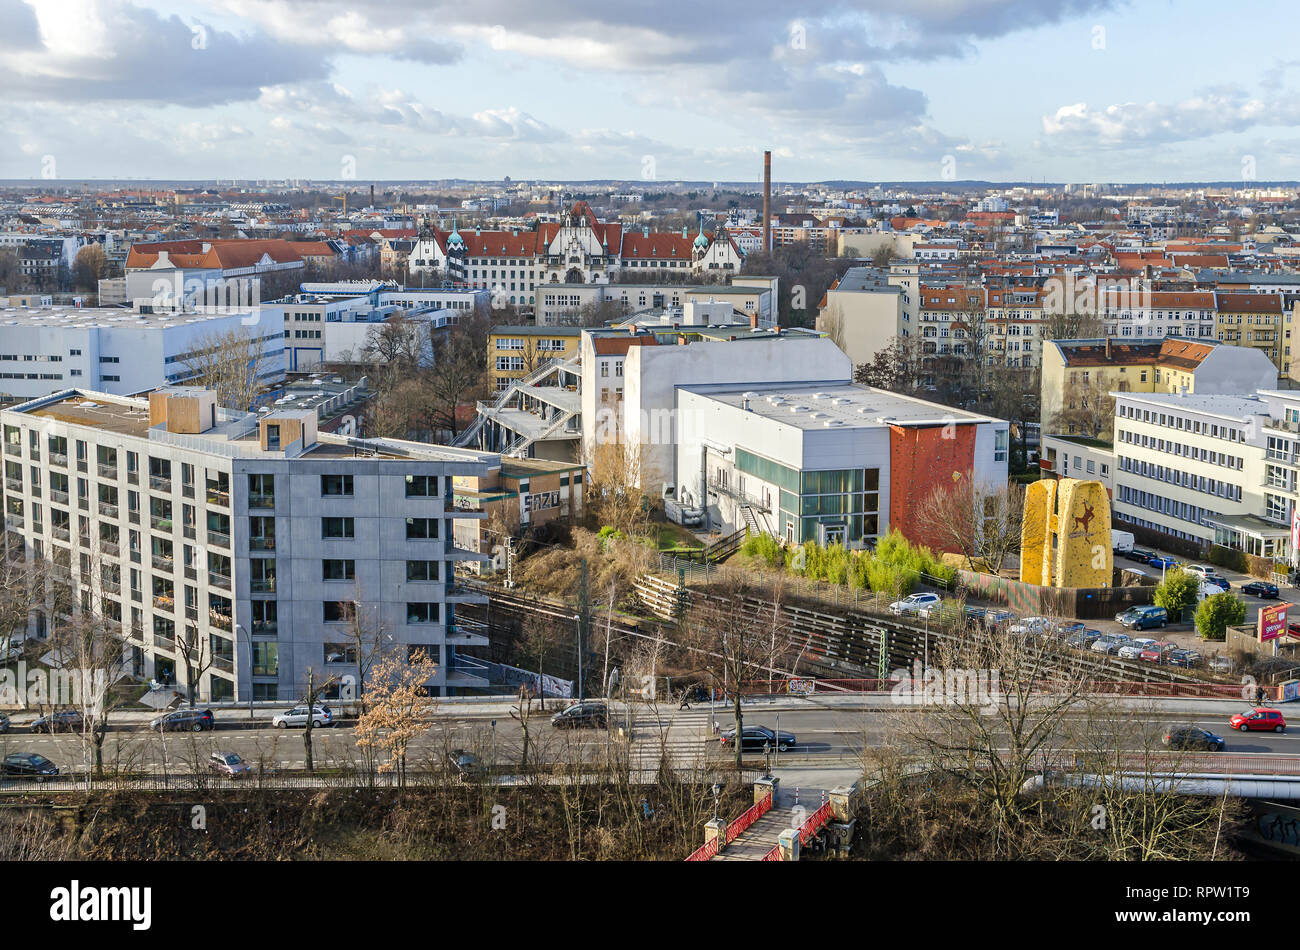 Berlin, Germany - February 11, 2019: View from the Flak tower Humboldthain over the district Gesundbrunnen with the Humboldsteg, Boettgerstrasse Stock Photo